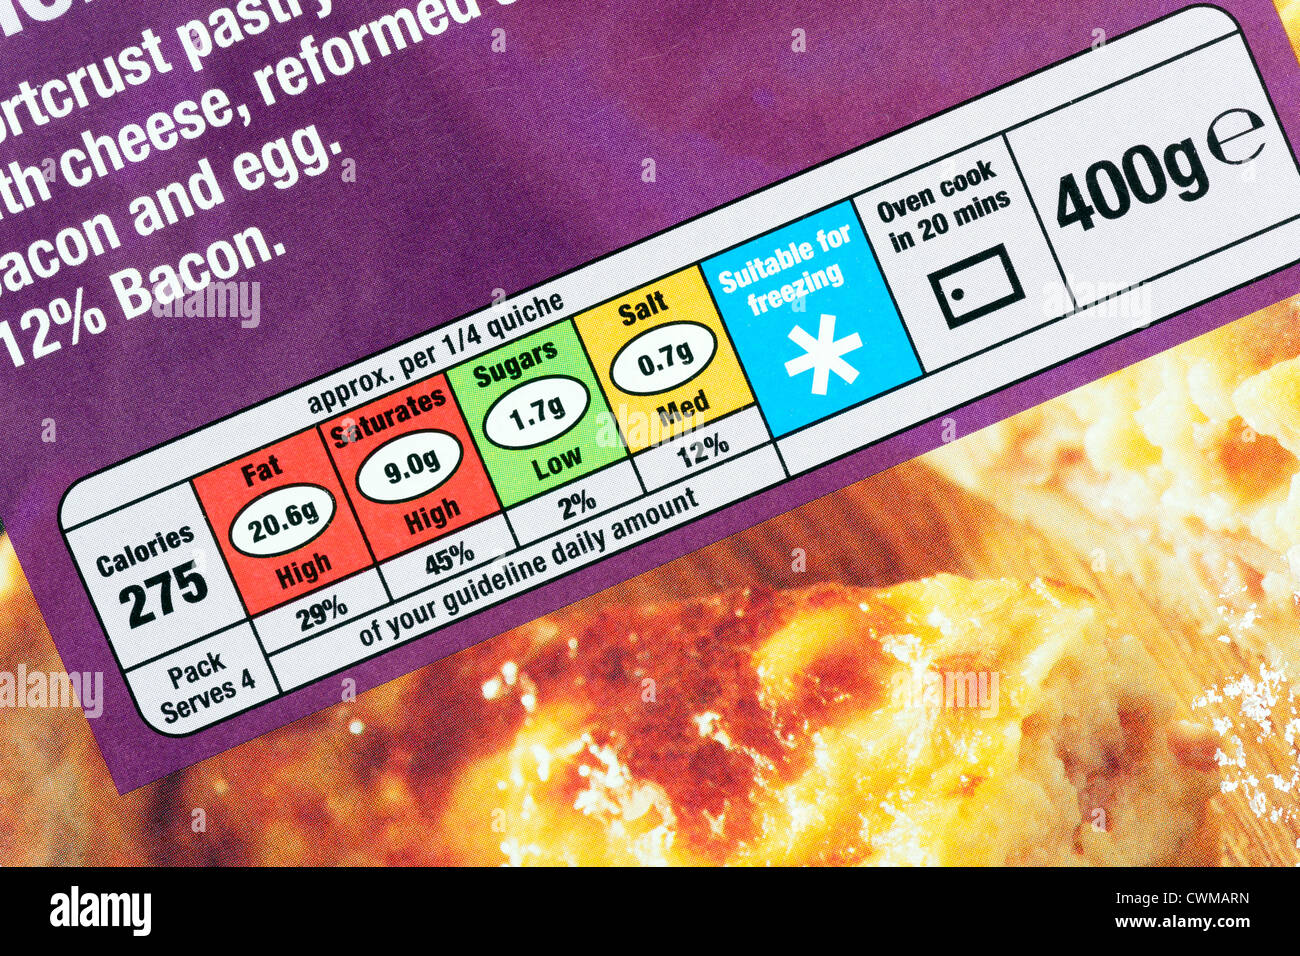 ingredients and nutritional information on food packaging Stock Photo